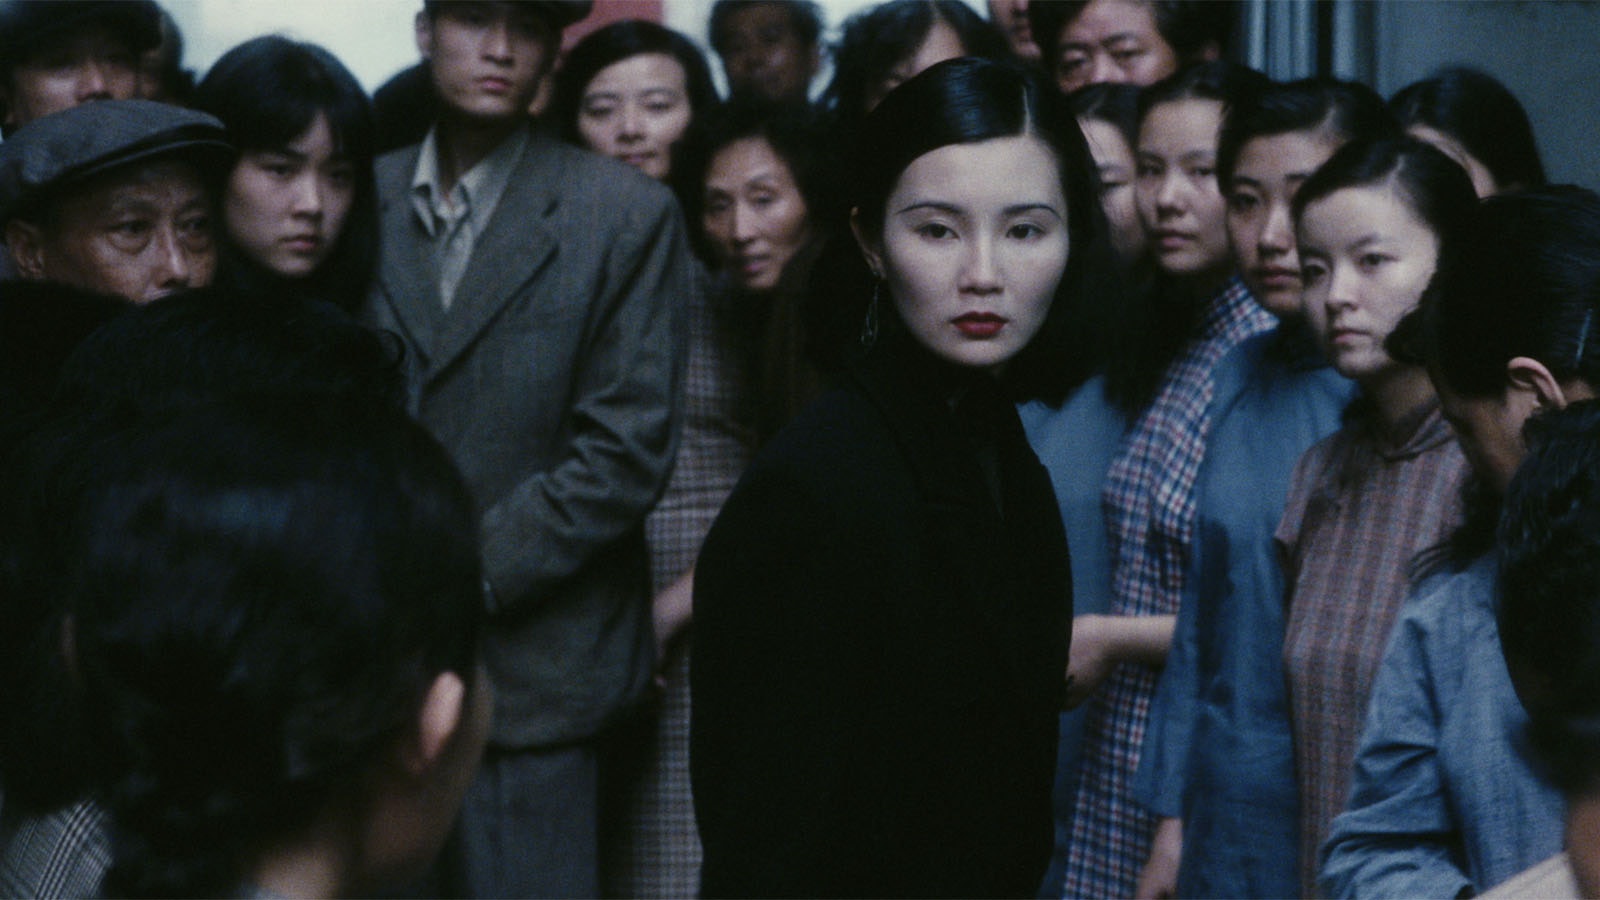 Maggie Cheung as Ruan Lingyu in Center Stage